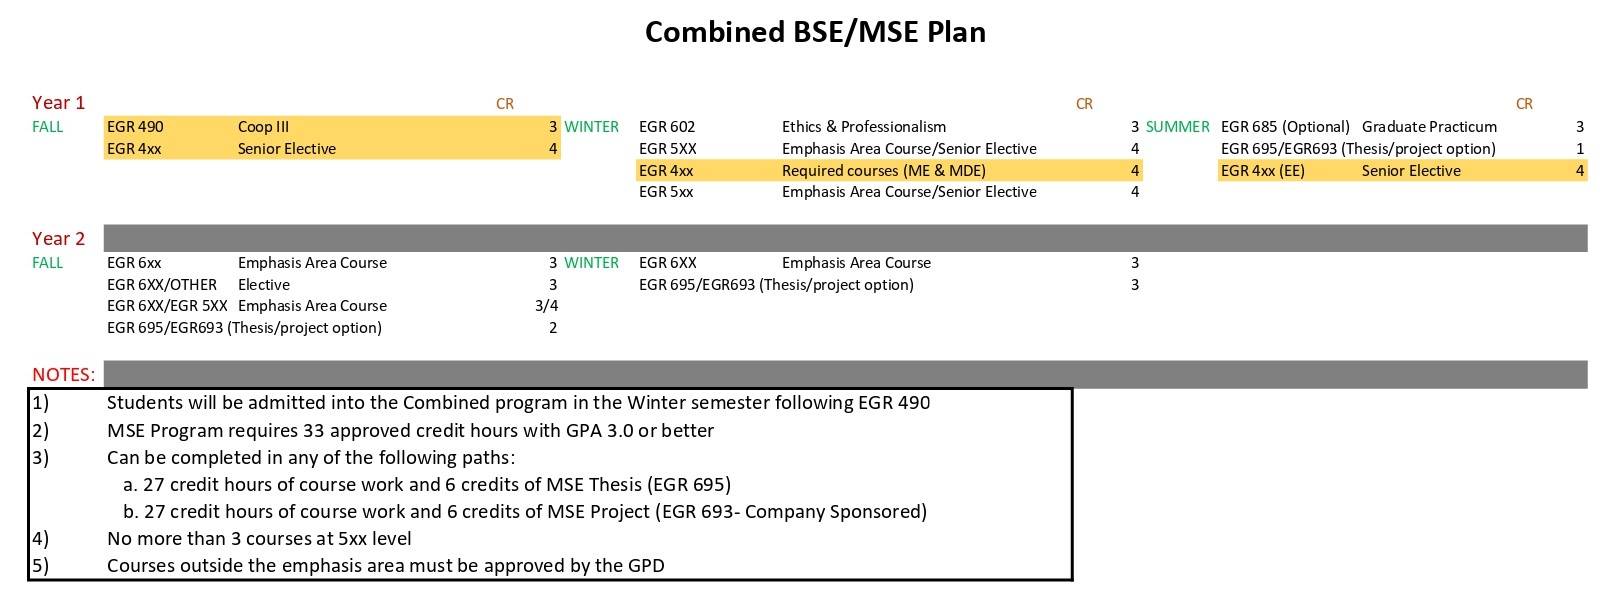 combined bse/mse plan